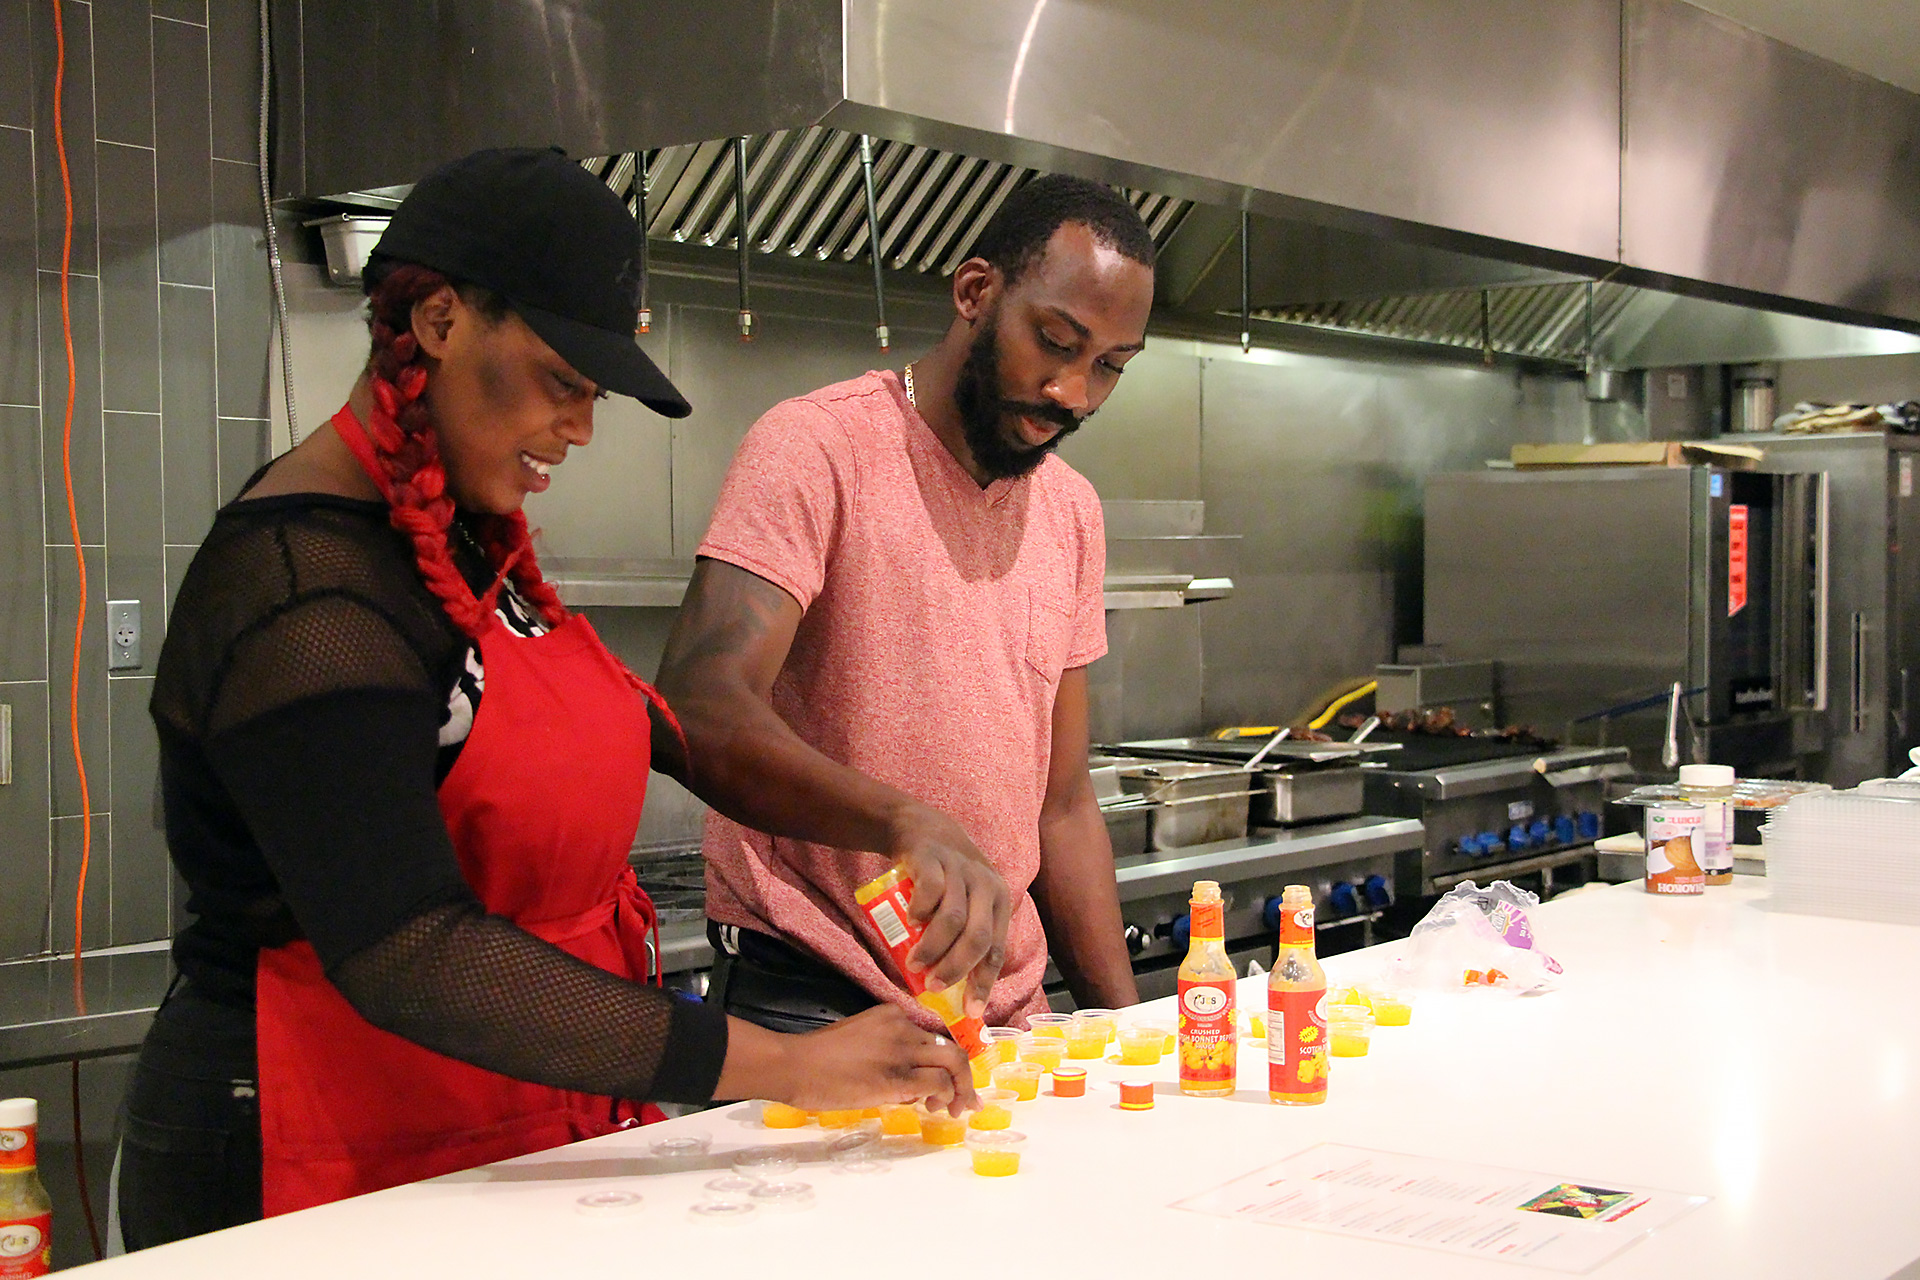 Co-owner and Chef OB Matterson (R) and staff filling containers with Scotch Bonnet Pepper Sauce.